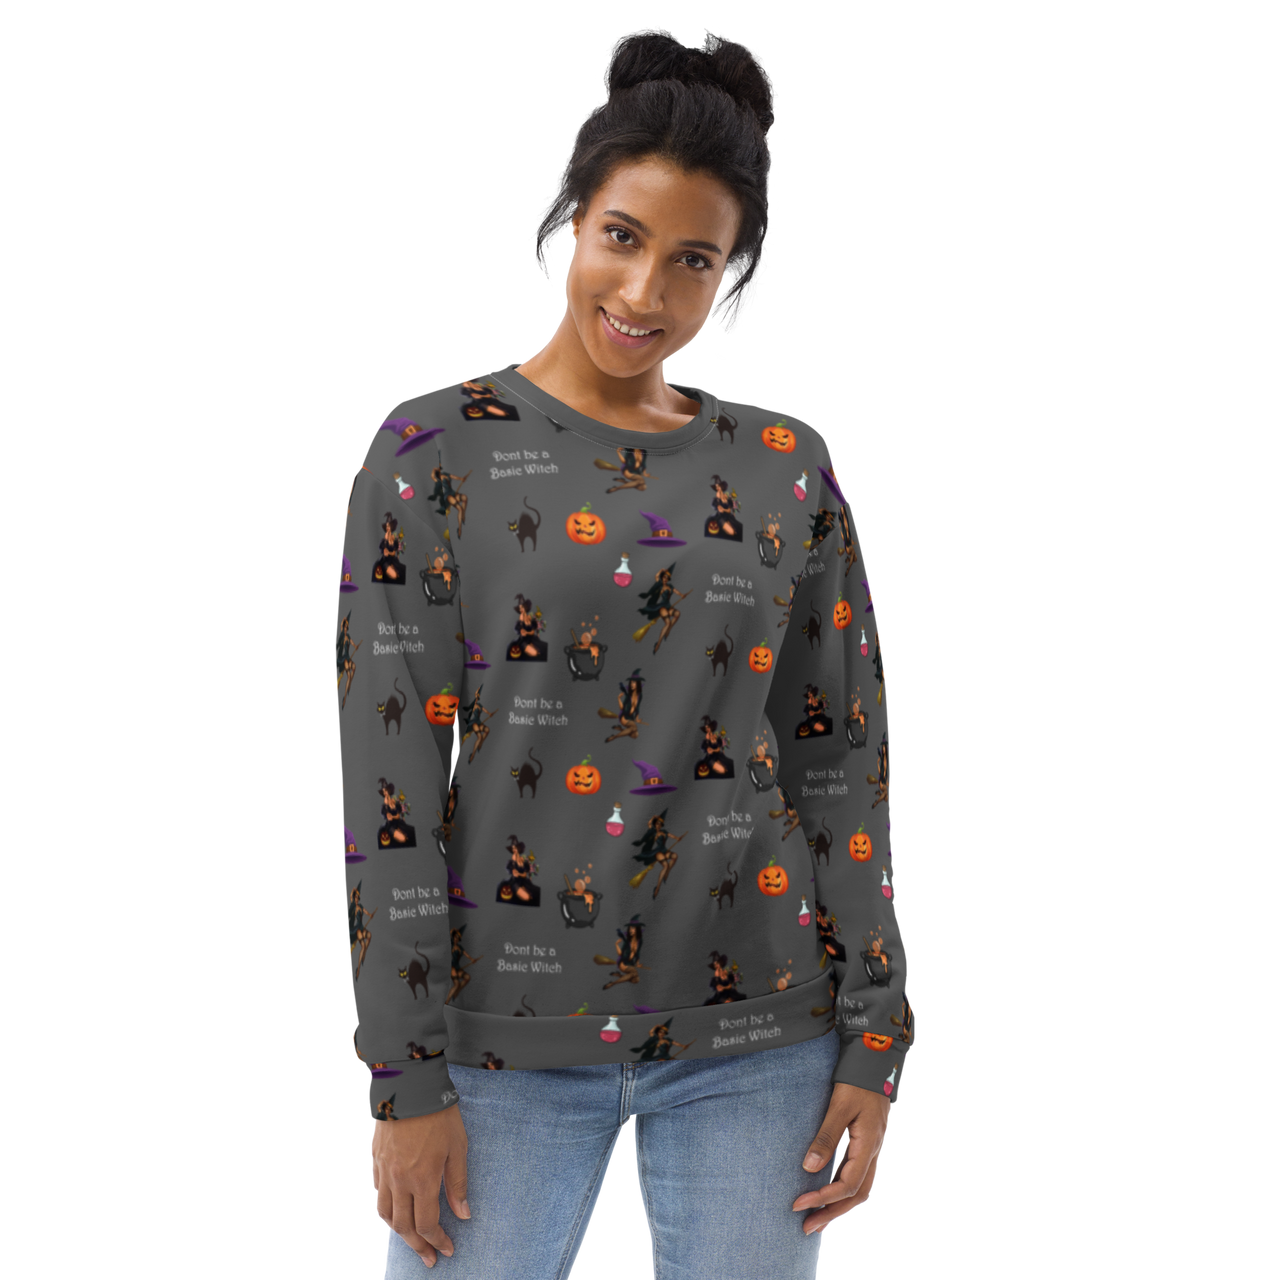 All over Unisex Halloween Sweater - Funny Halloween Sweatshirts - Unisex Halloween Sweatshirt For Halloween/Don't be a Basic Witch SHAVA